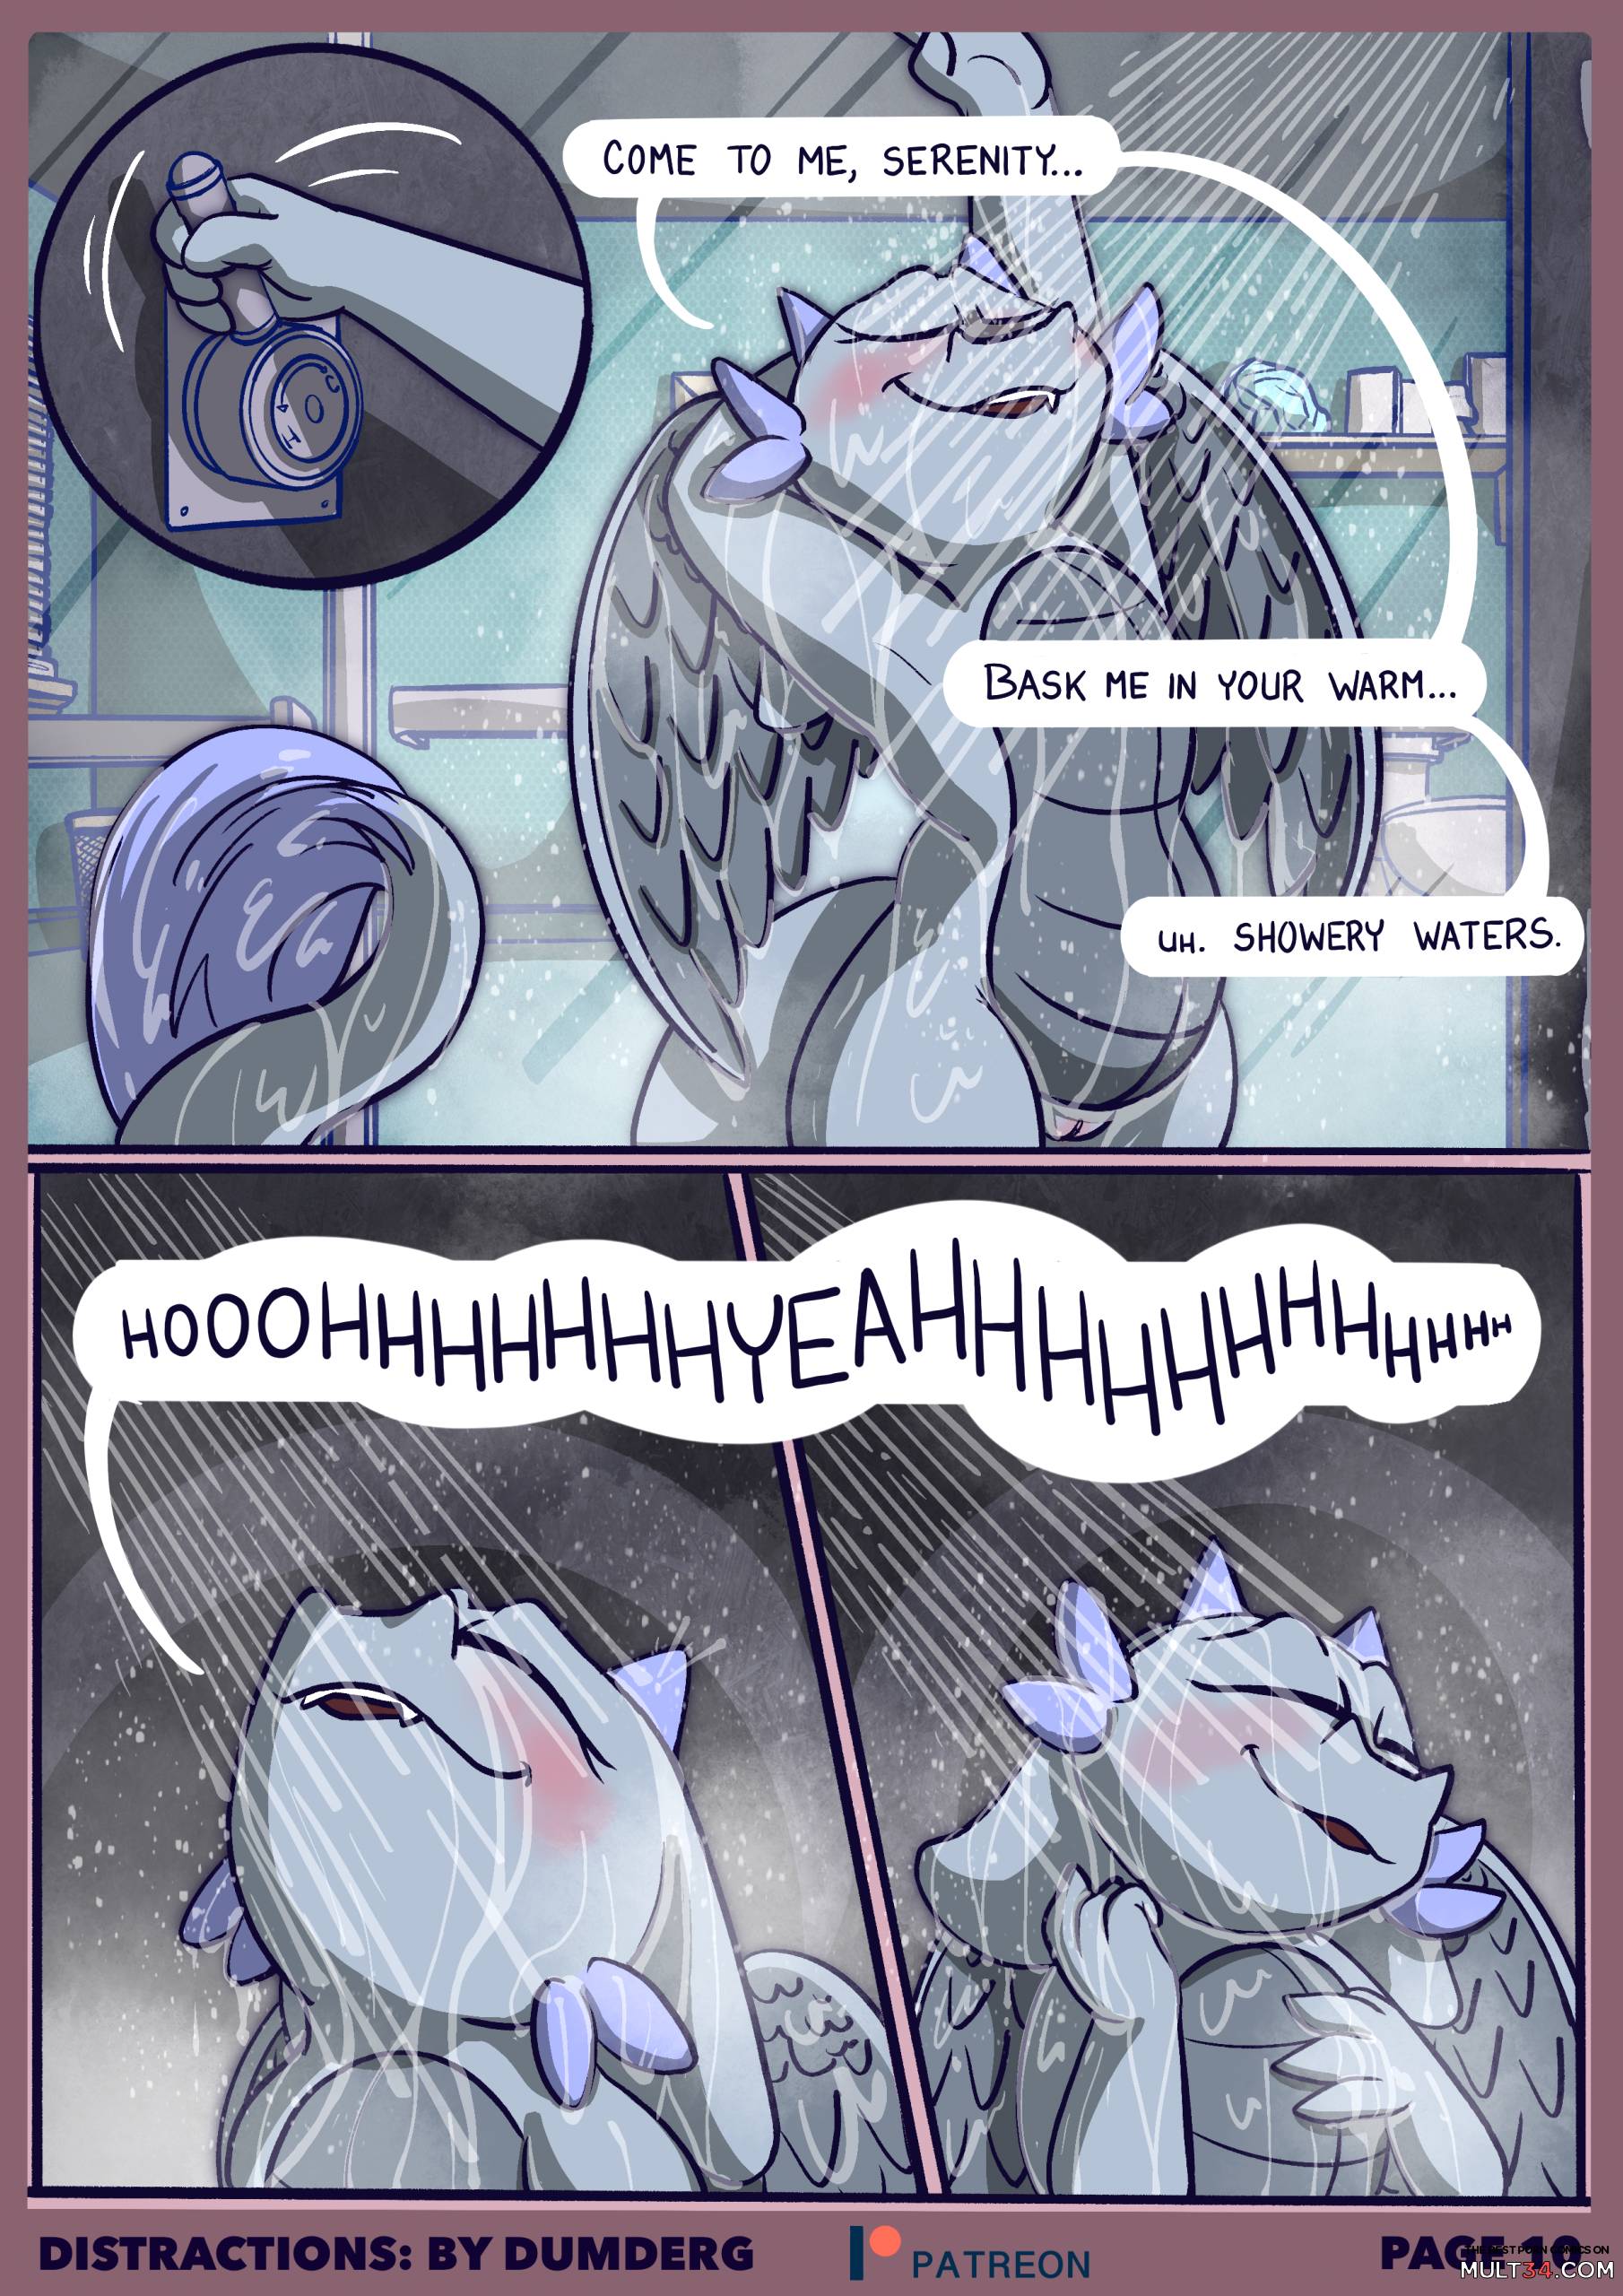 Distractions - DumDerg page 11